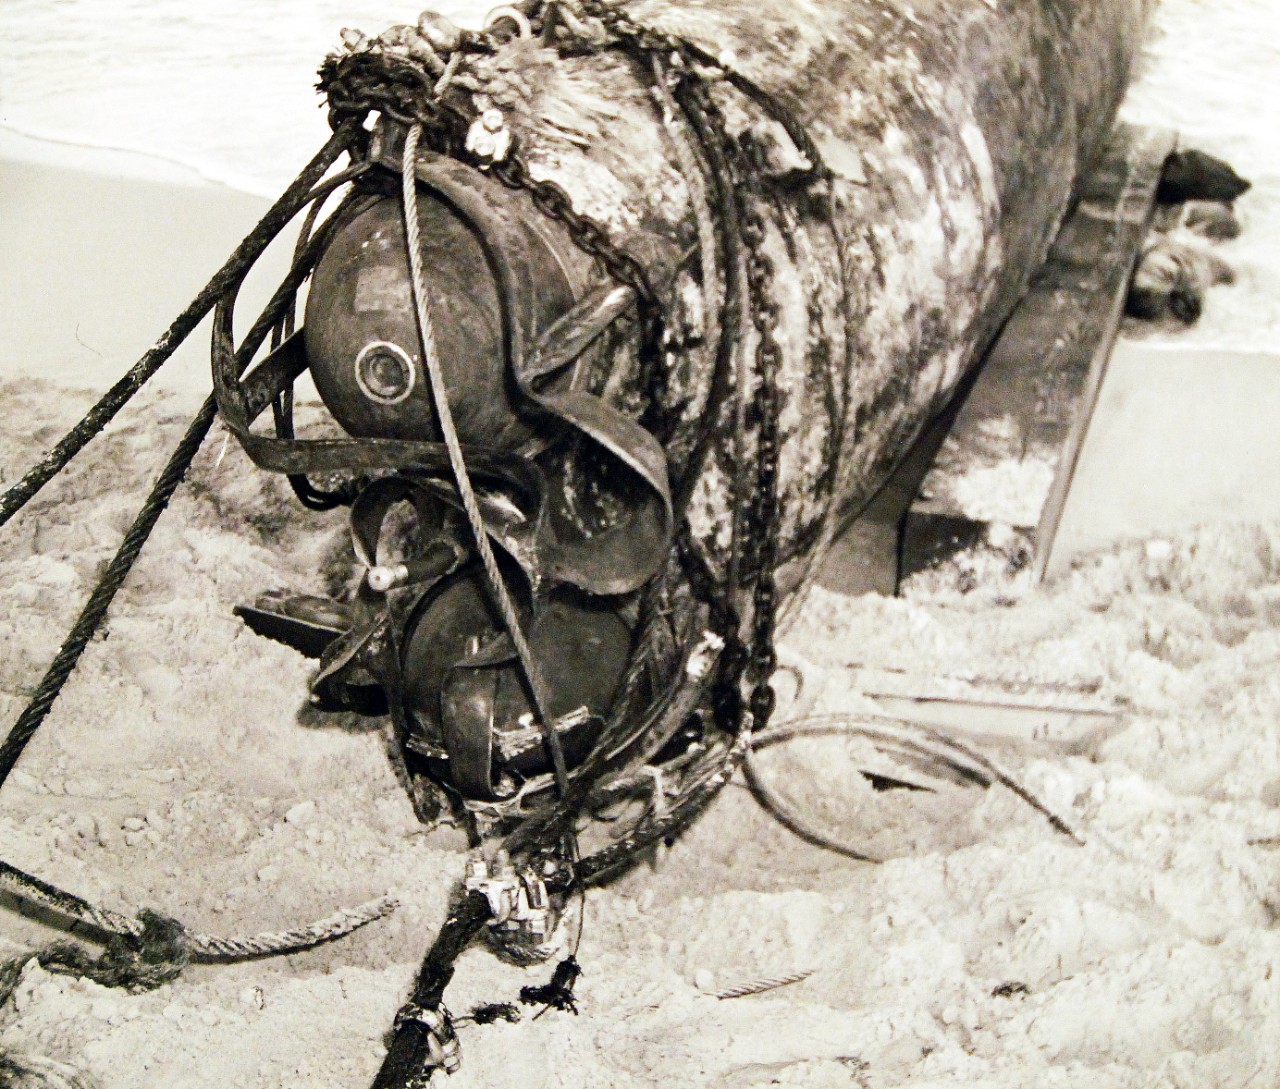 80-G-32686: HA-19. (Japanese "Type A" midget submarine).  Beached in eastern Oahu, after it unsuccessfully attempted to enter Pearl Harbor during the attack. The photograph was taken on or shortly after 8 December 1941. Official U.S. Navy photograph, now in the collections of the National Archives. (7/2/2014).